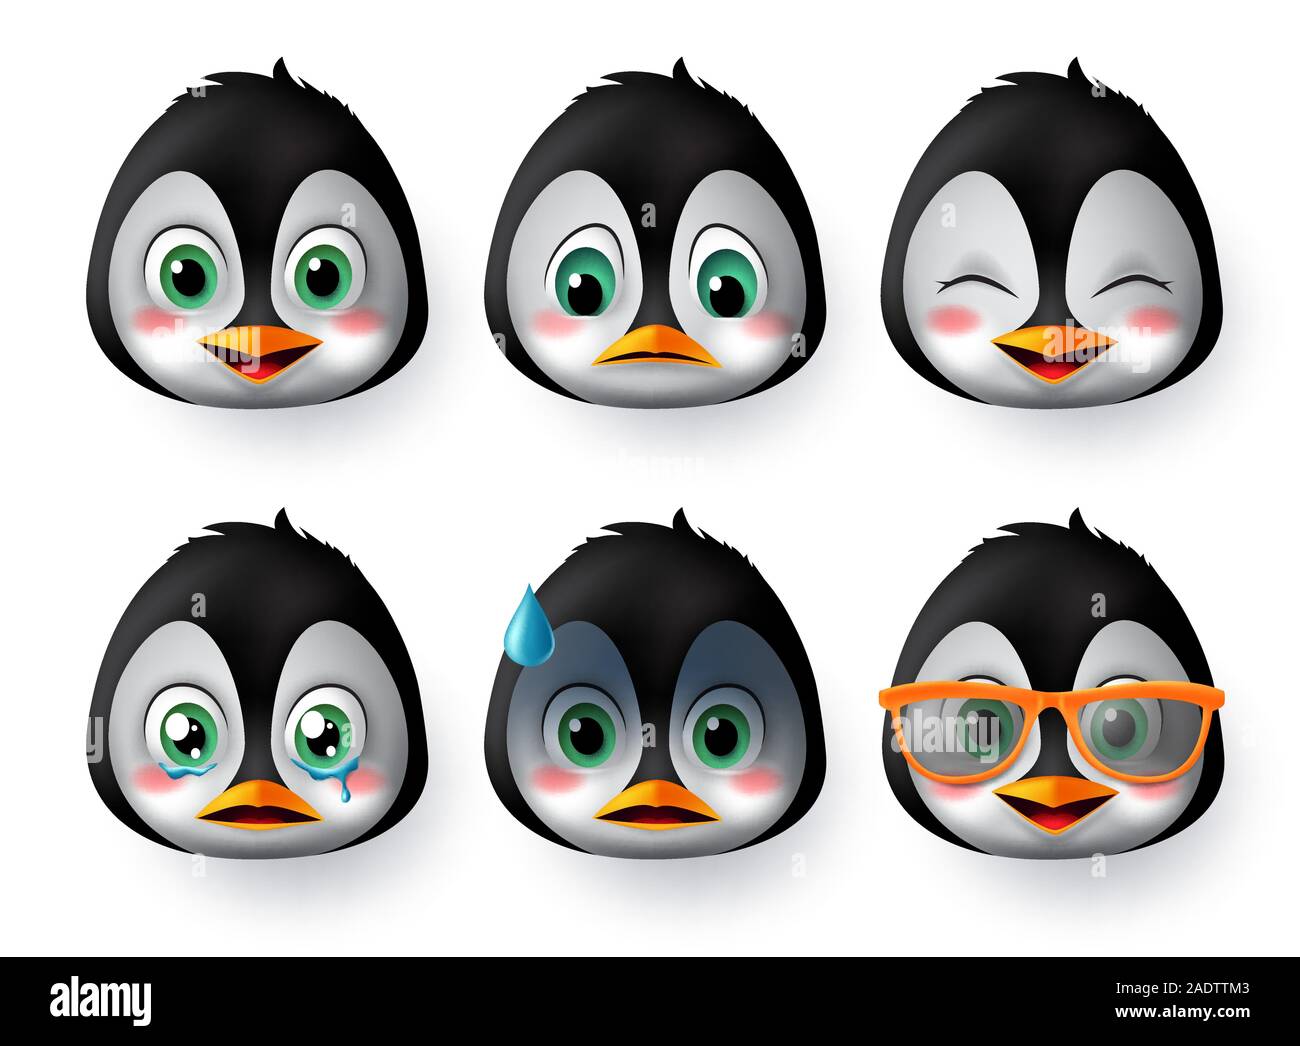 Penguins emoji or emoticon face vector set. Penguin emoji animal face wearing sunglasses with happy, scared, crying, and sad emotions for avatar. Stock Vector